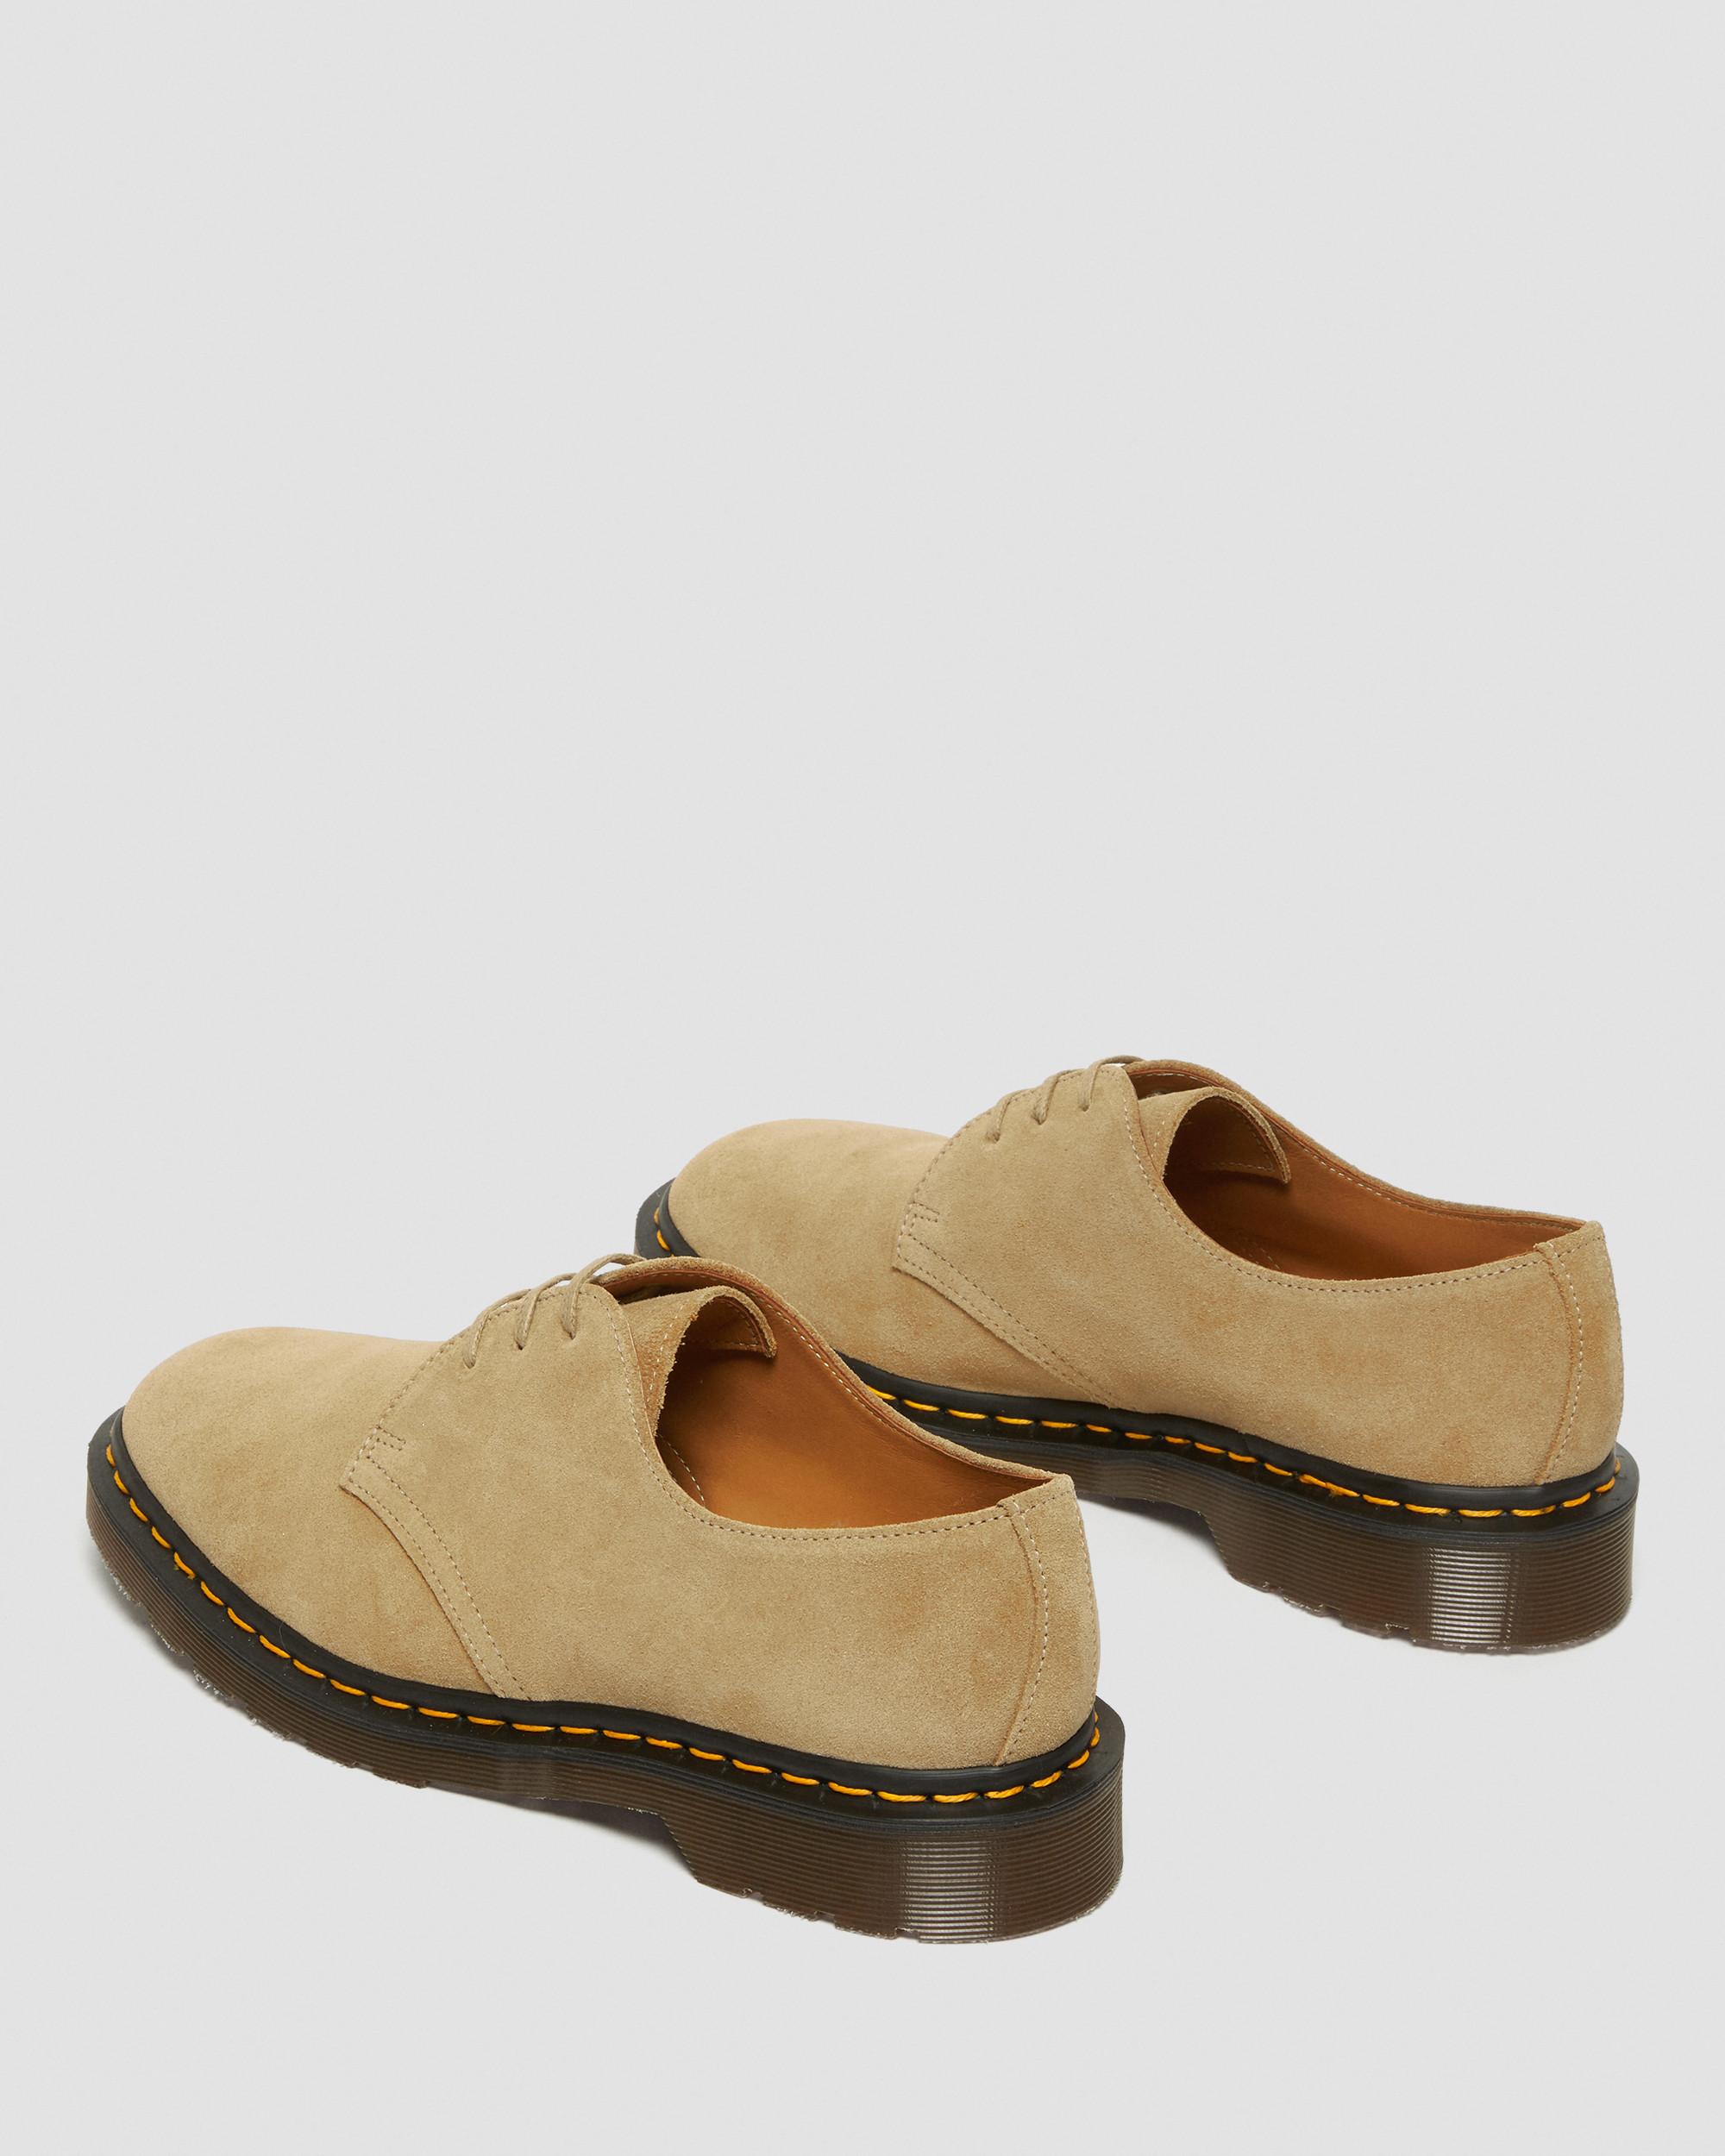 1461 Made in England Buck Suede Oxford Shoes | Dr. Martens